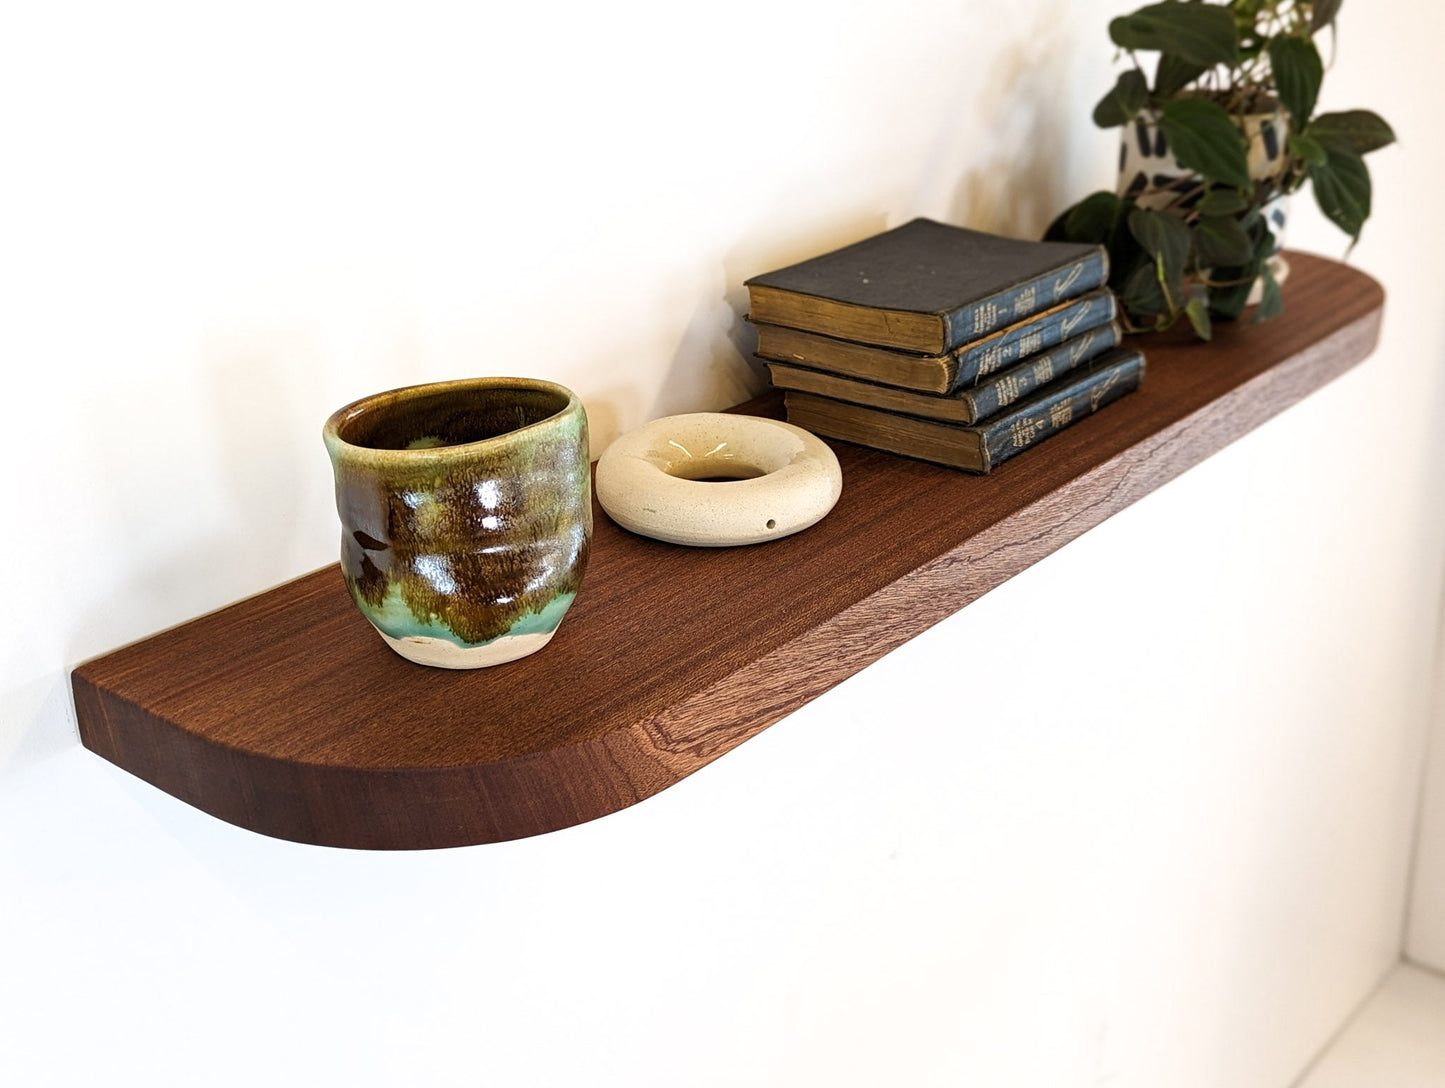 Thick Oak Floating Shelf with Rounded Corners